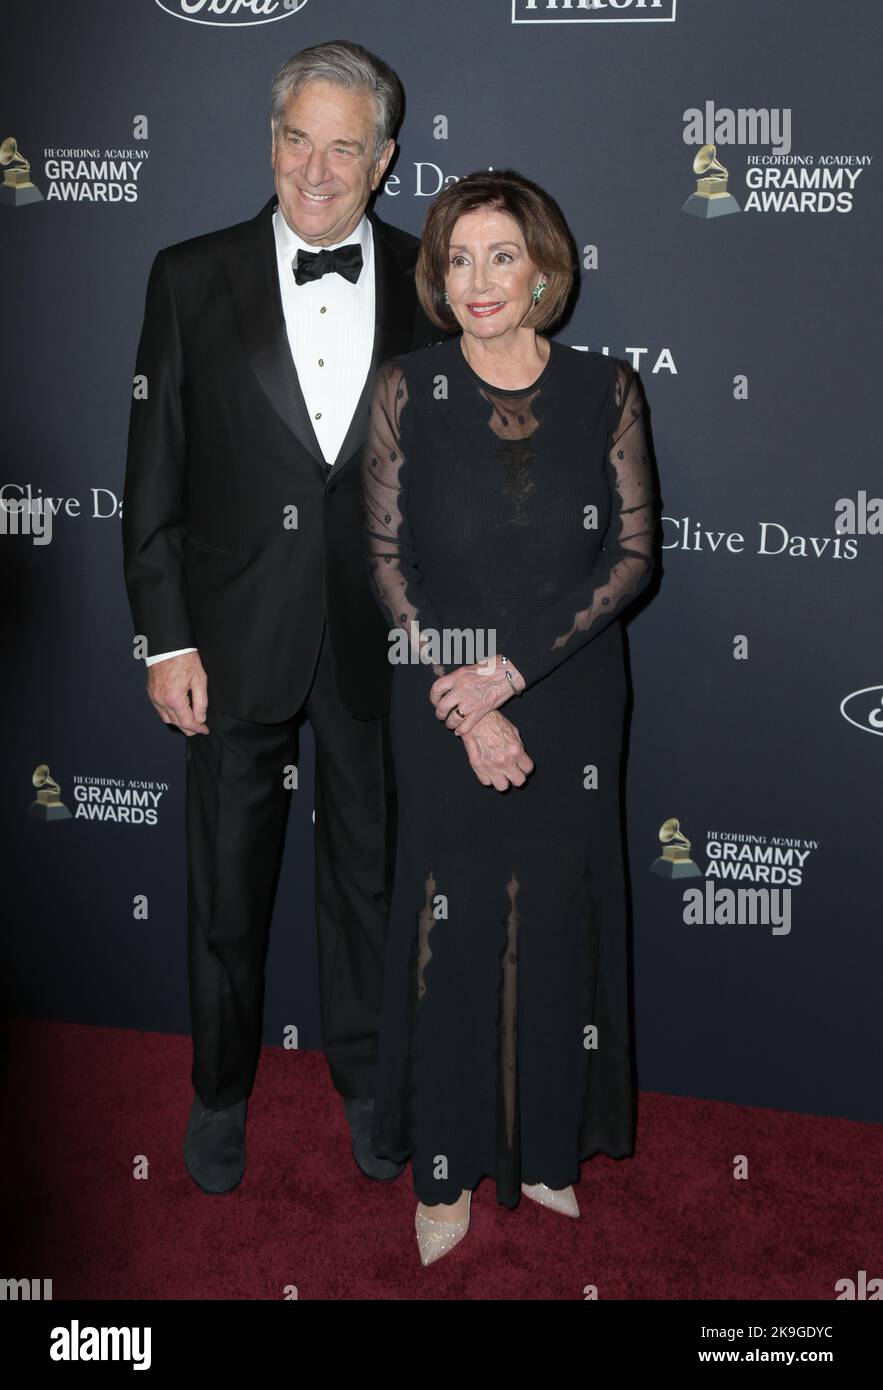 Paul Pelosi, Nancy Pelosi walking the red carpet at the Clive Davis' 2020 Pre-Grammy Gala held at The Beverly Hilton Hotel on January 25, 2020 in Los Angeles, California USA (Photo by Parisa Afsahi/Sipa USA) Stock Photo